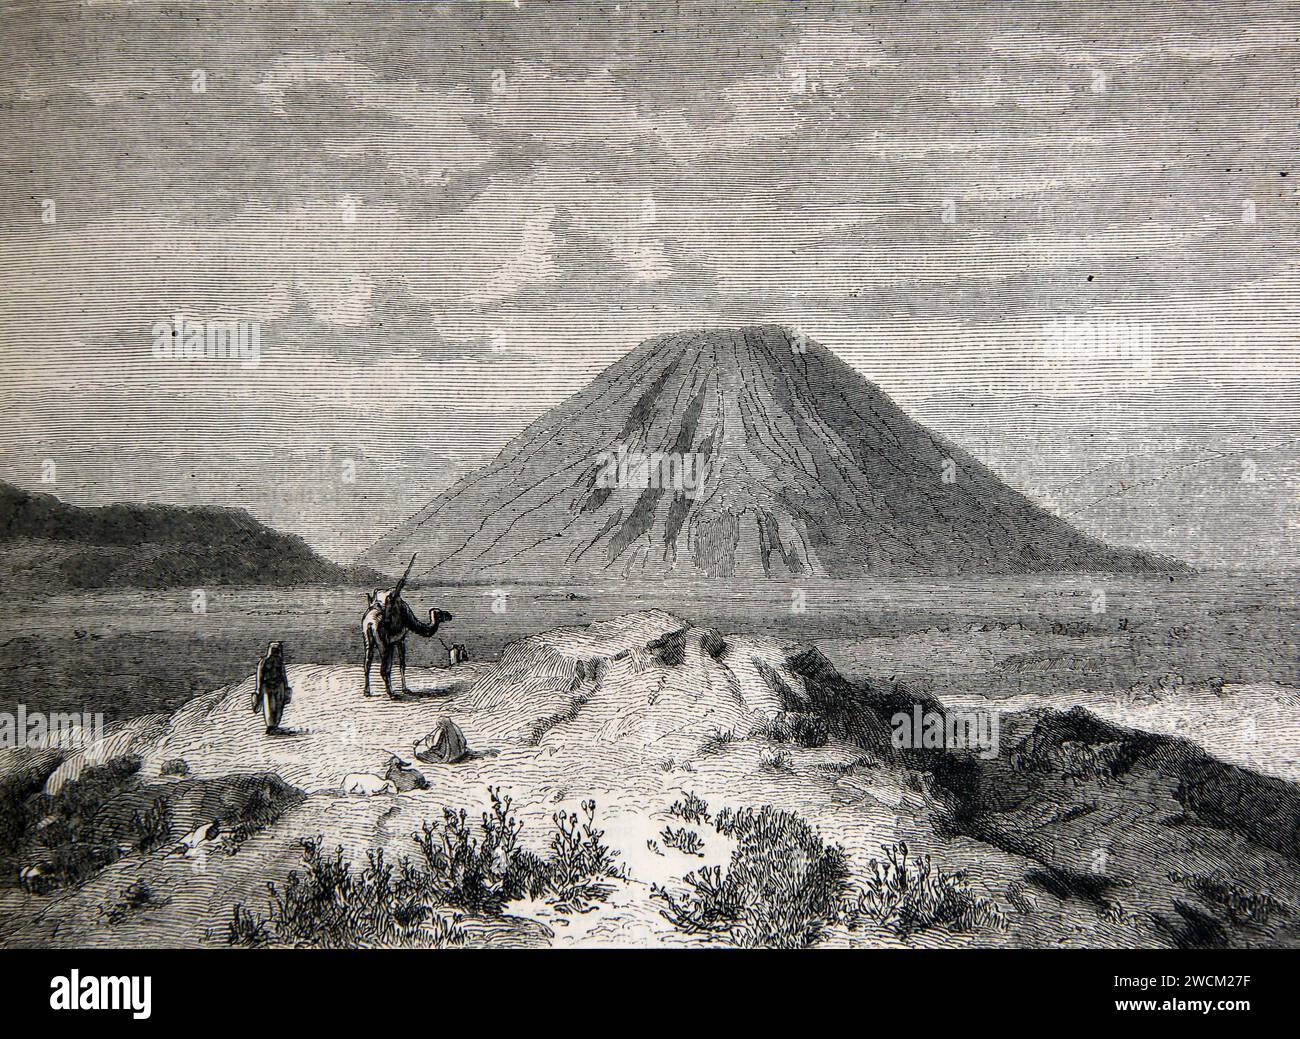 Illustration of Mount Tabor in Israel where the Battle of Mount Tabor took place Between the Israelites and the Canaanite's from Illustrated Family Bi Stock Photo